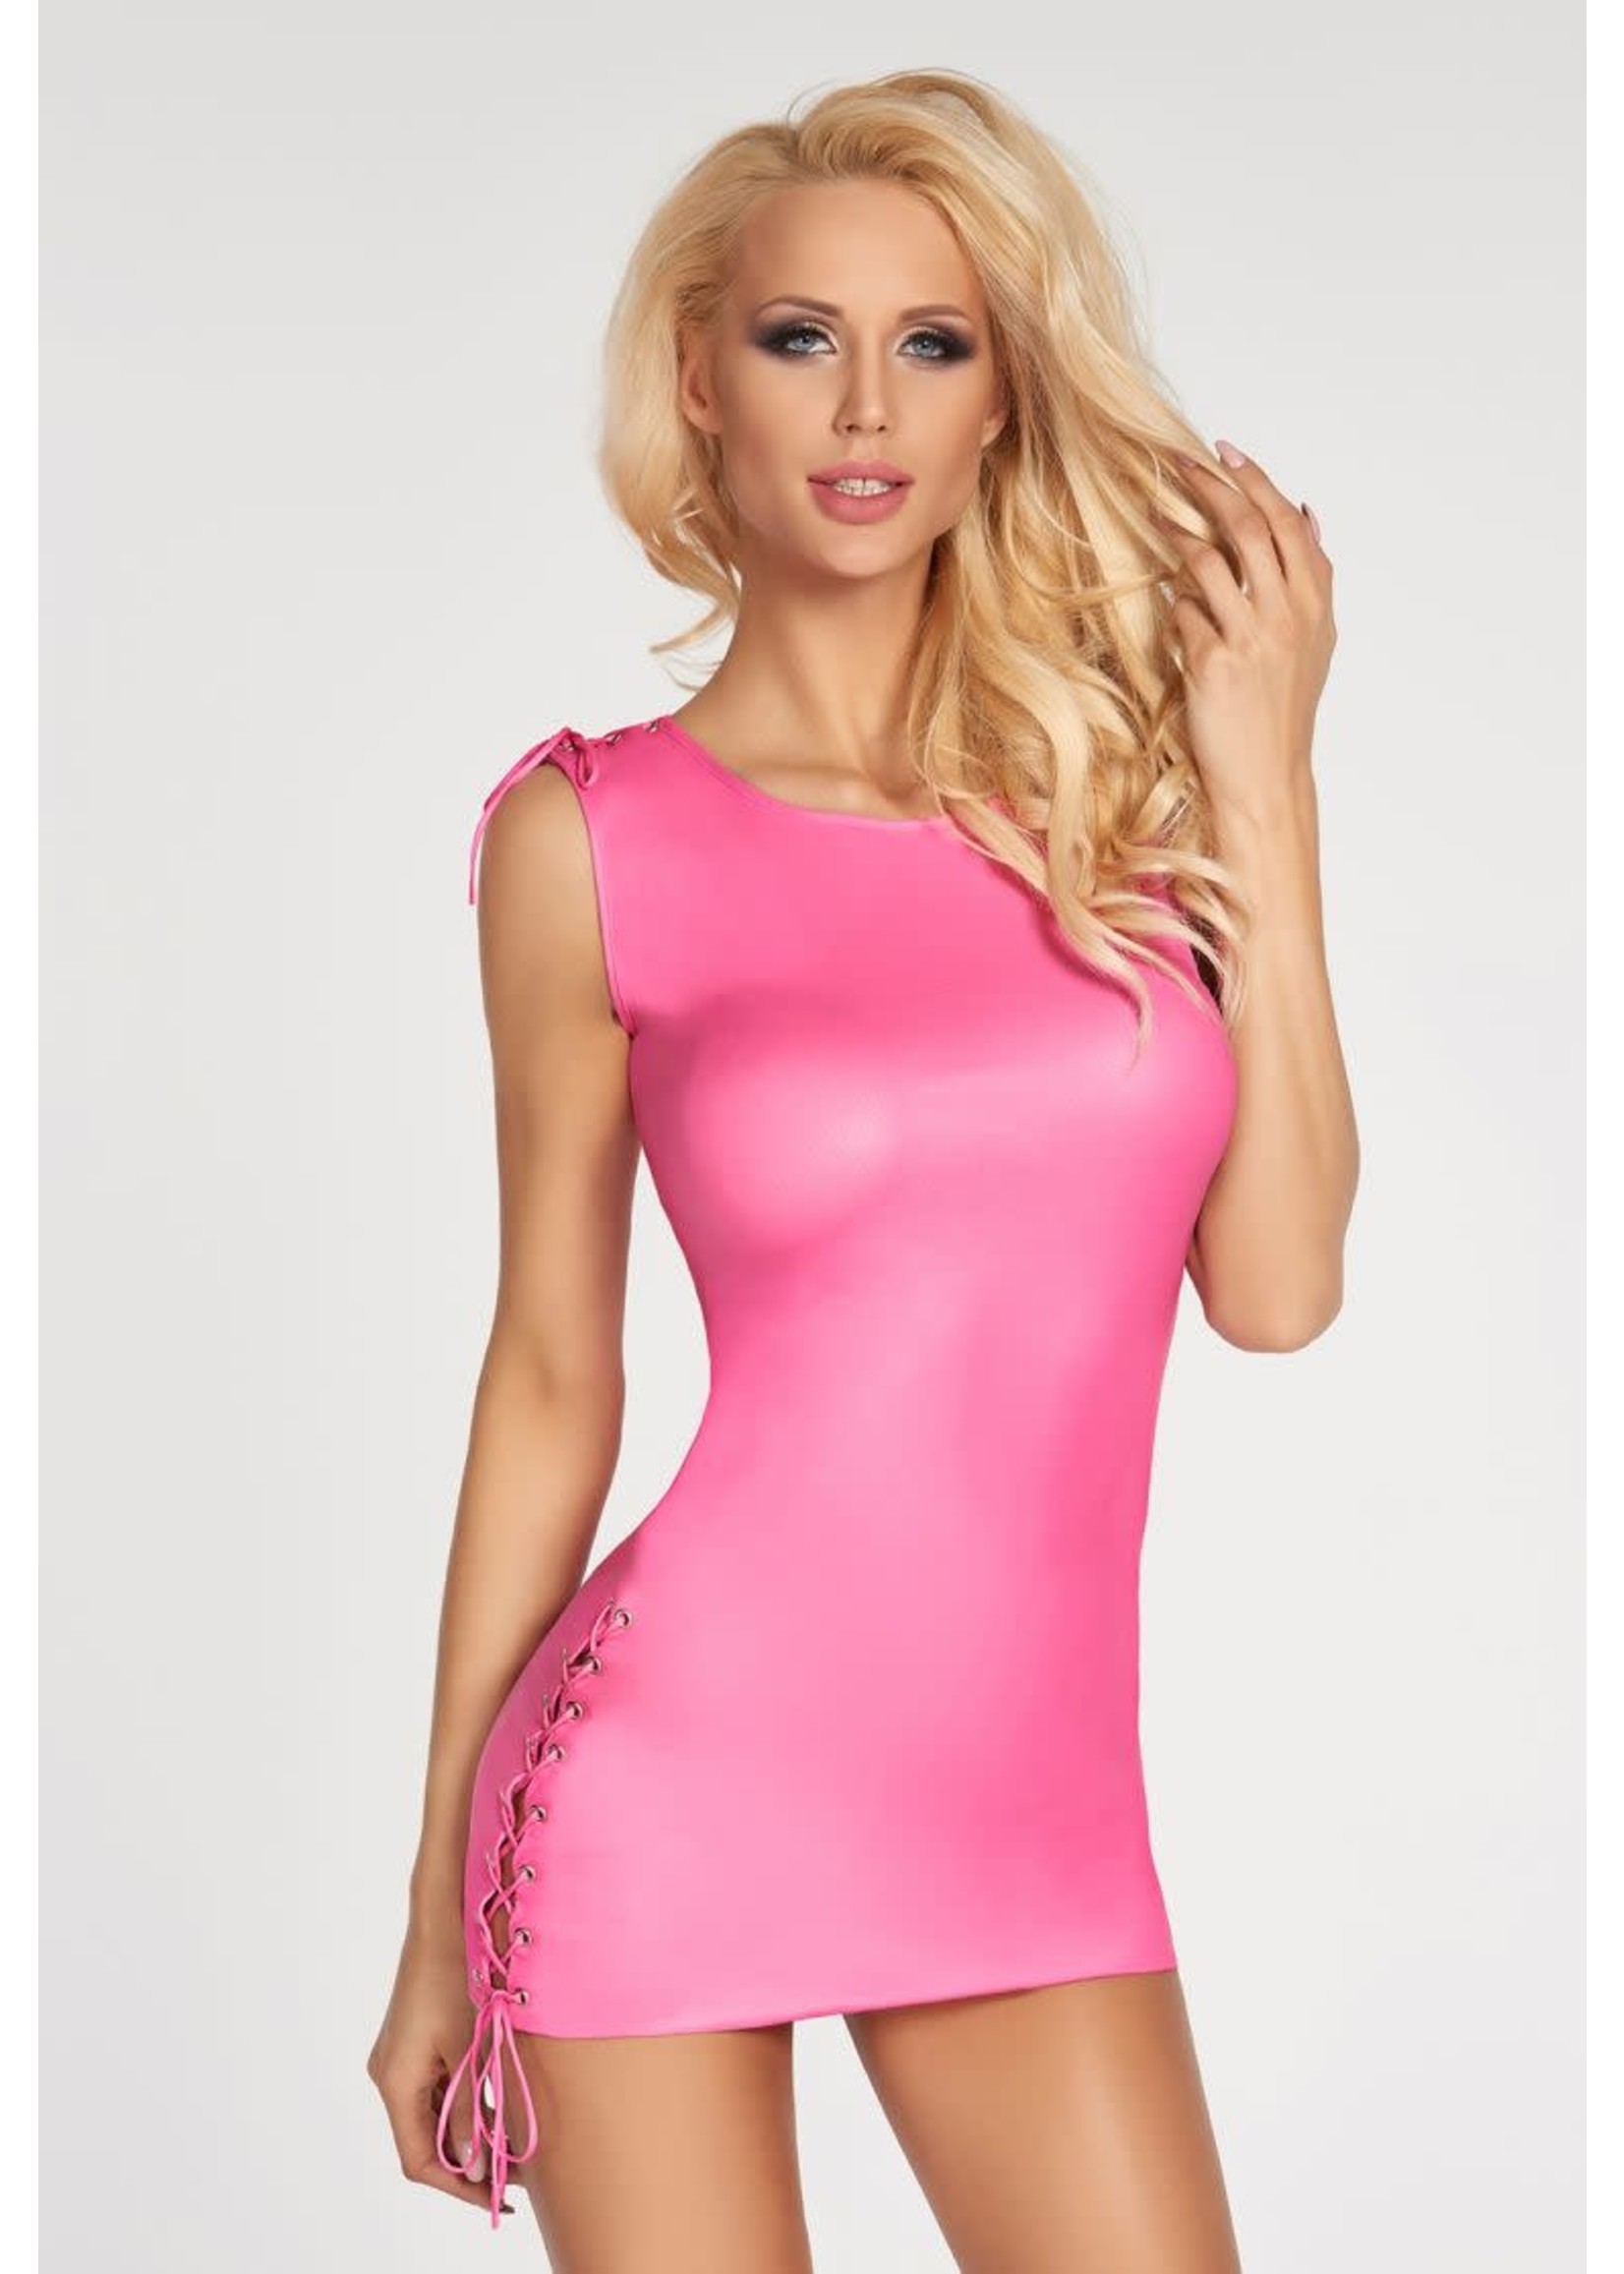 7 HEAVEN 7 HEAVEN - SEXY PINK DRESS WITH LACING - 3XLARGE